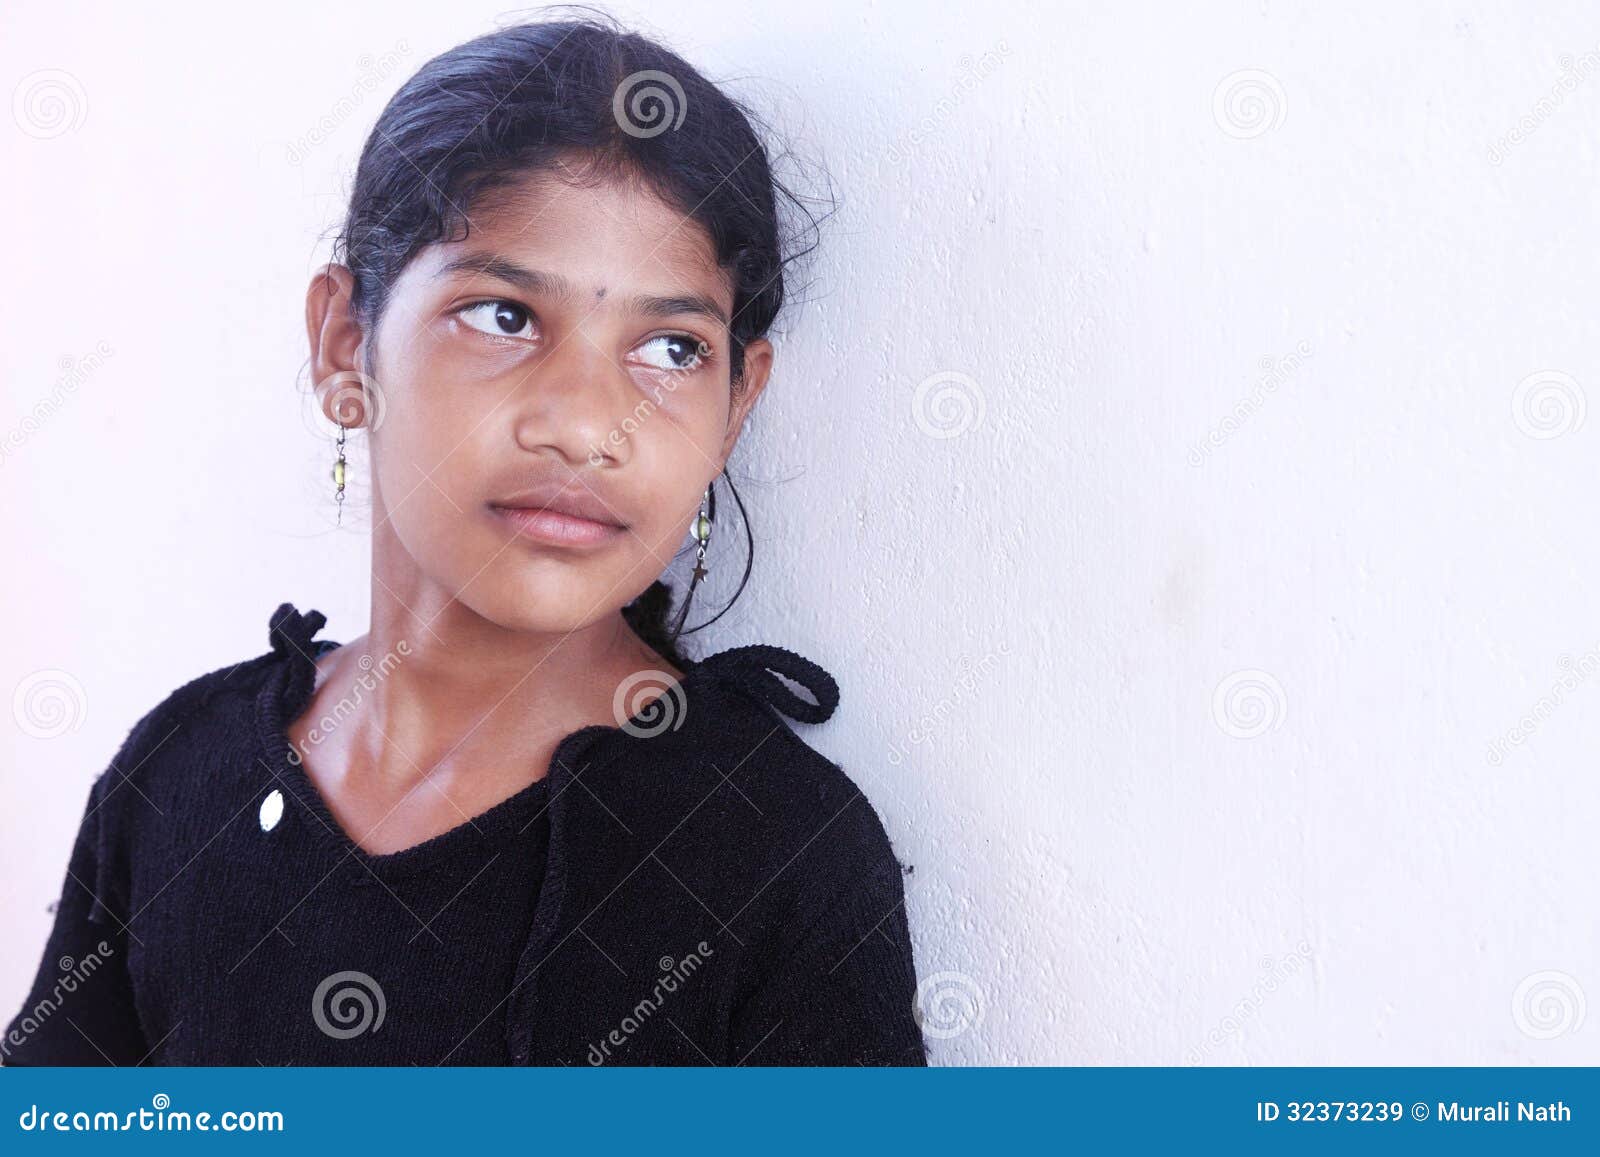 1,920 Cute Indian Village Girl Stock Photos - Free & Royalty-Free Stock  Photos from Dreamstime